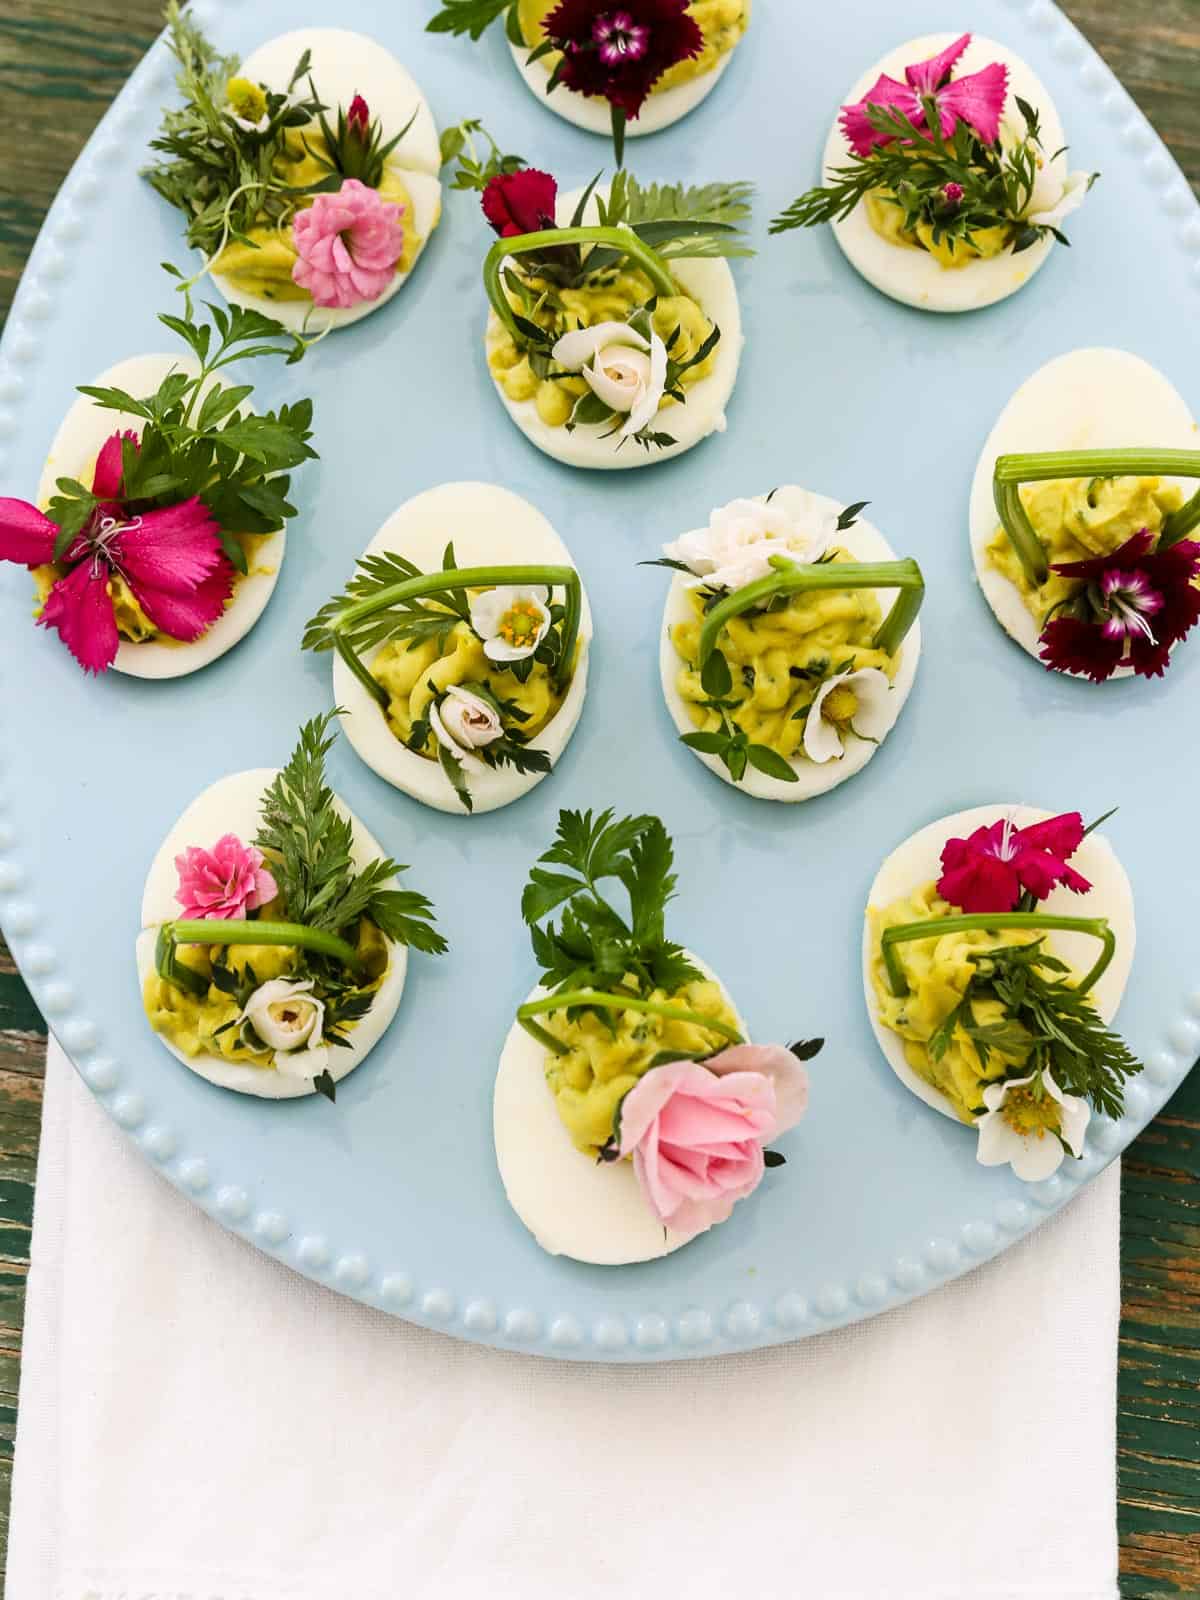 Looking down into a pastel blue egg shaped plate loaded with deviled eggs for Easter decorated with edible flowers and herbs.